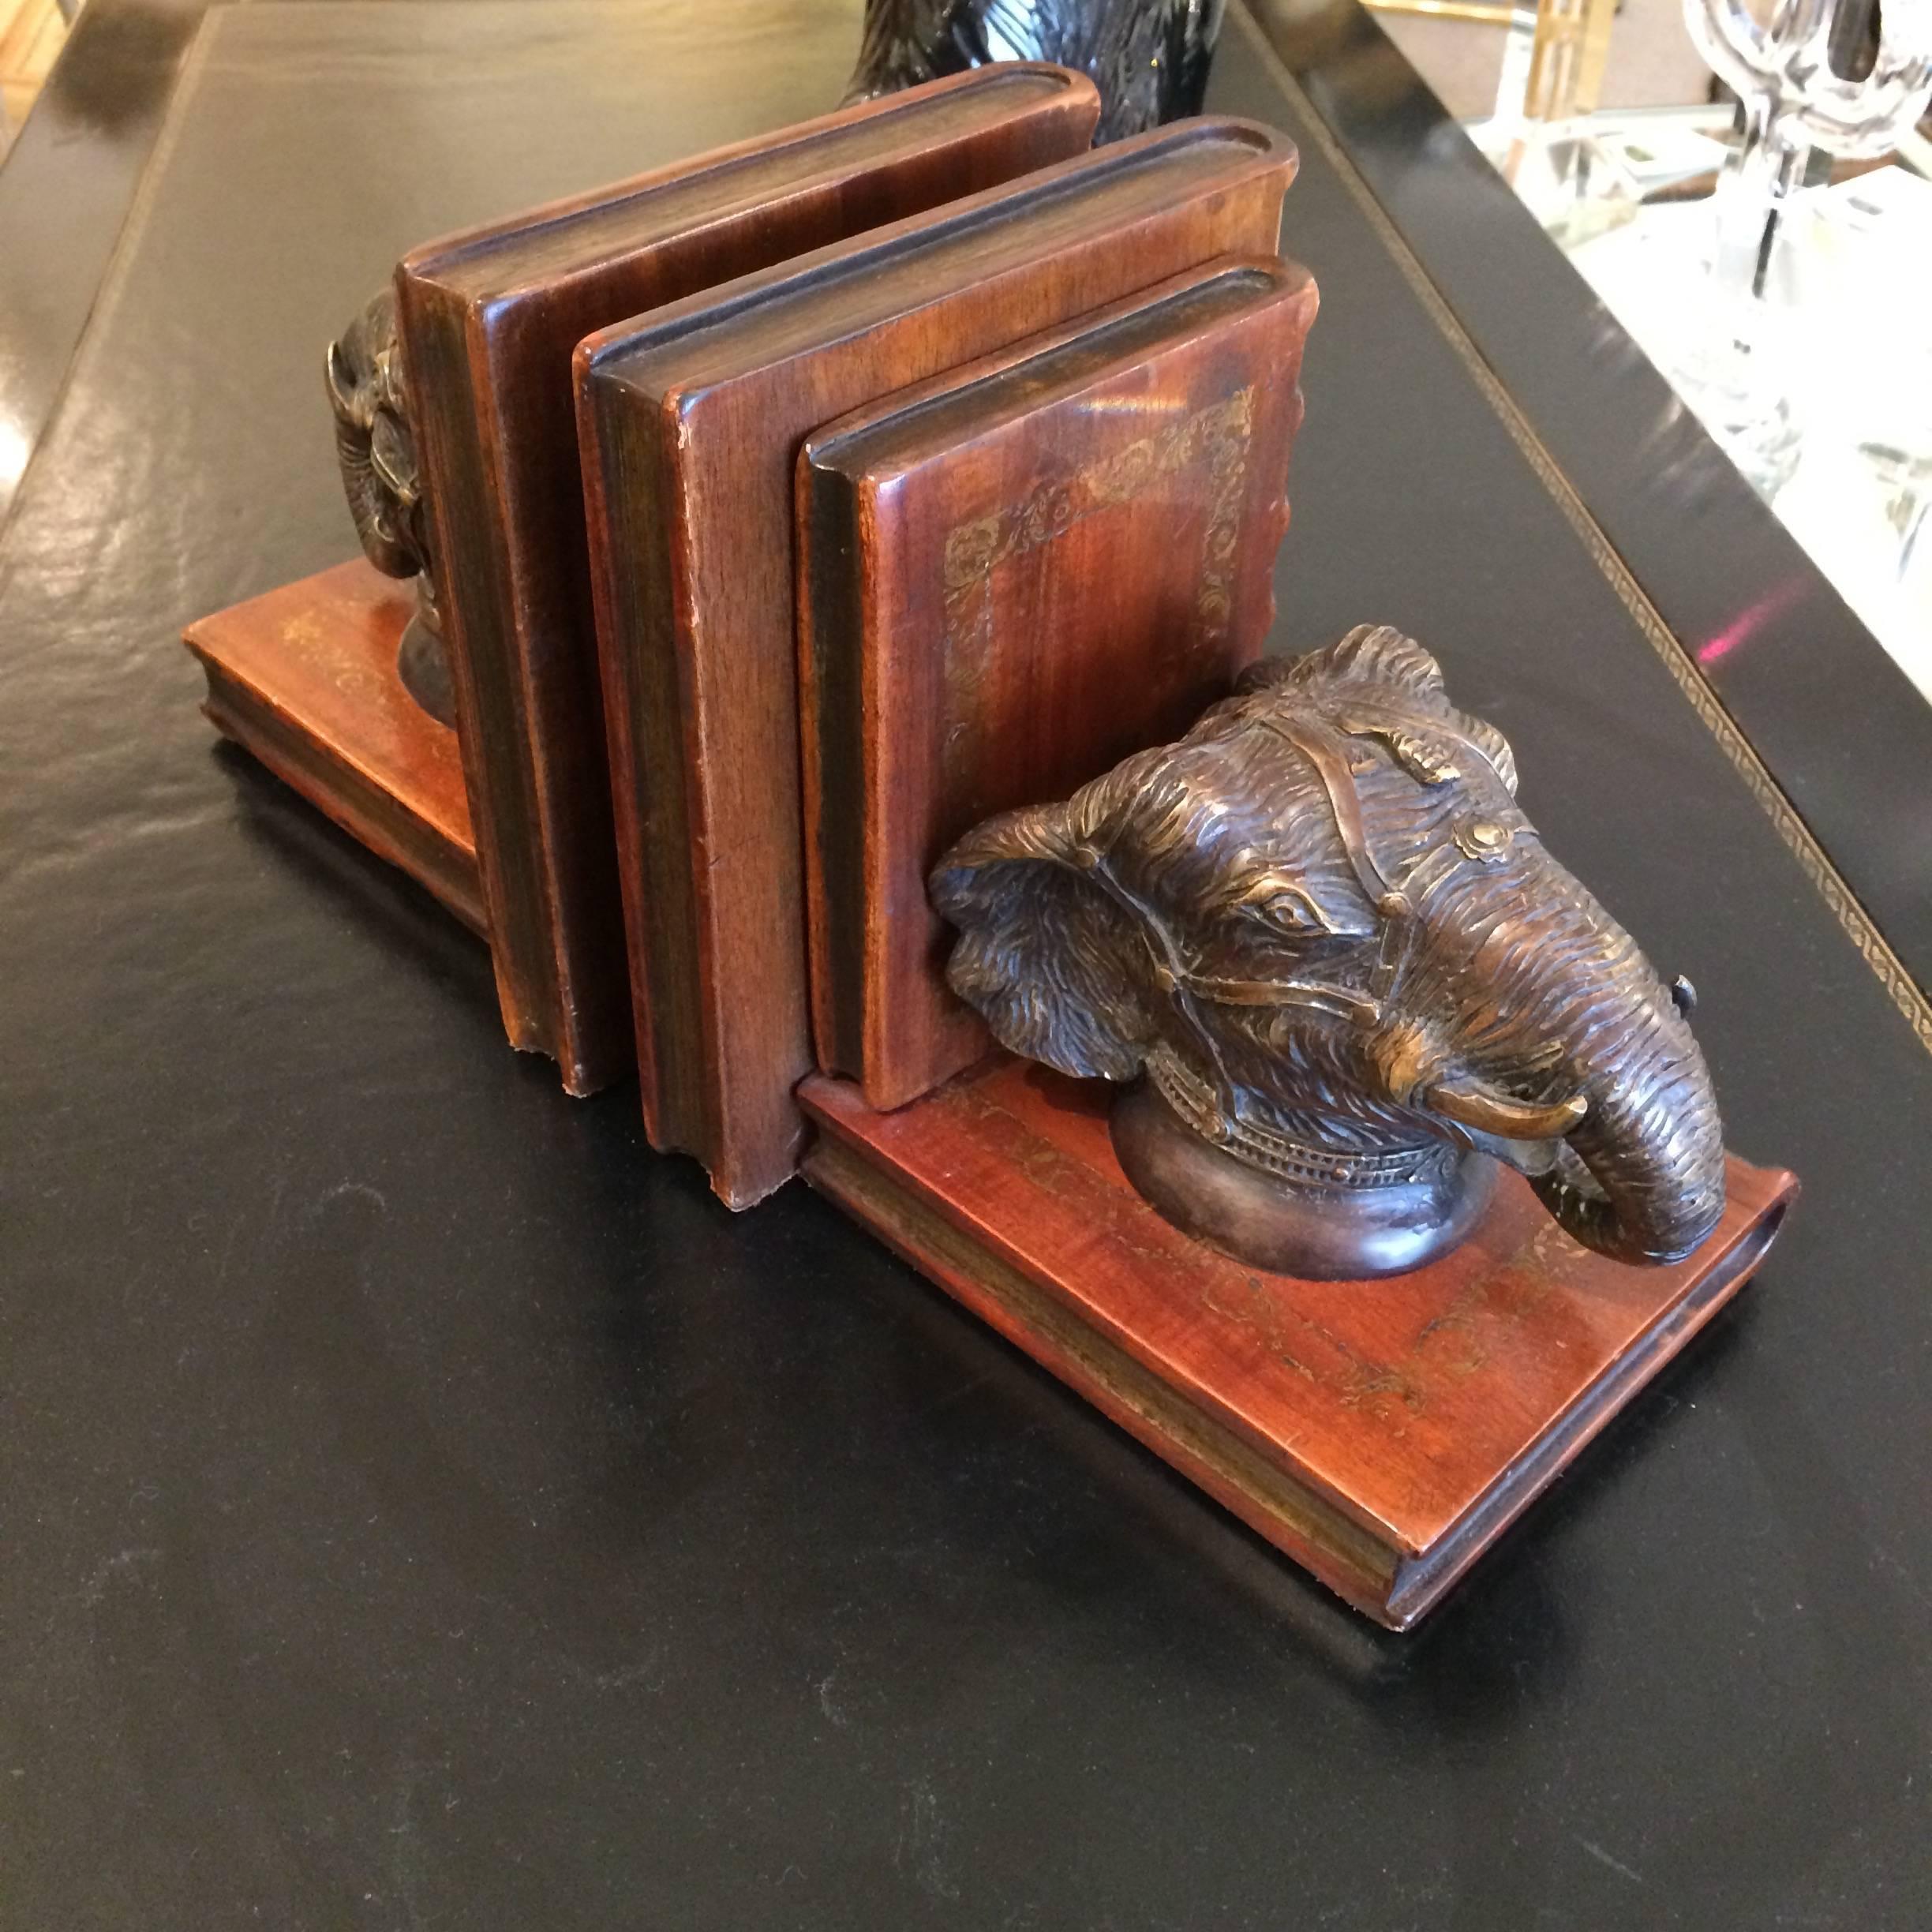 Very handsome bookends with rich patina by Maitland Smith, having carved wood books that look like leather, bronze elephant heads, and embellished subtle gilding.